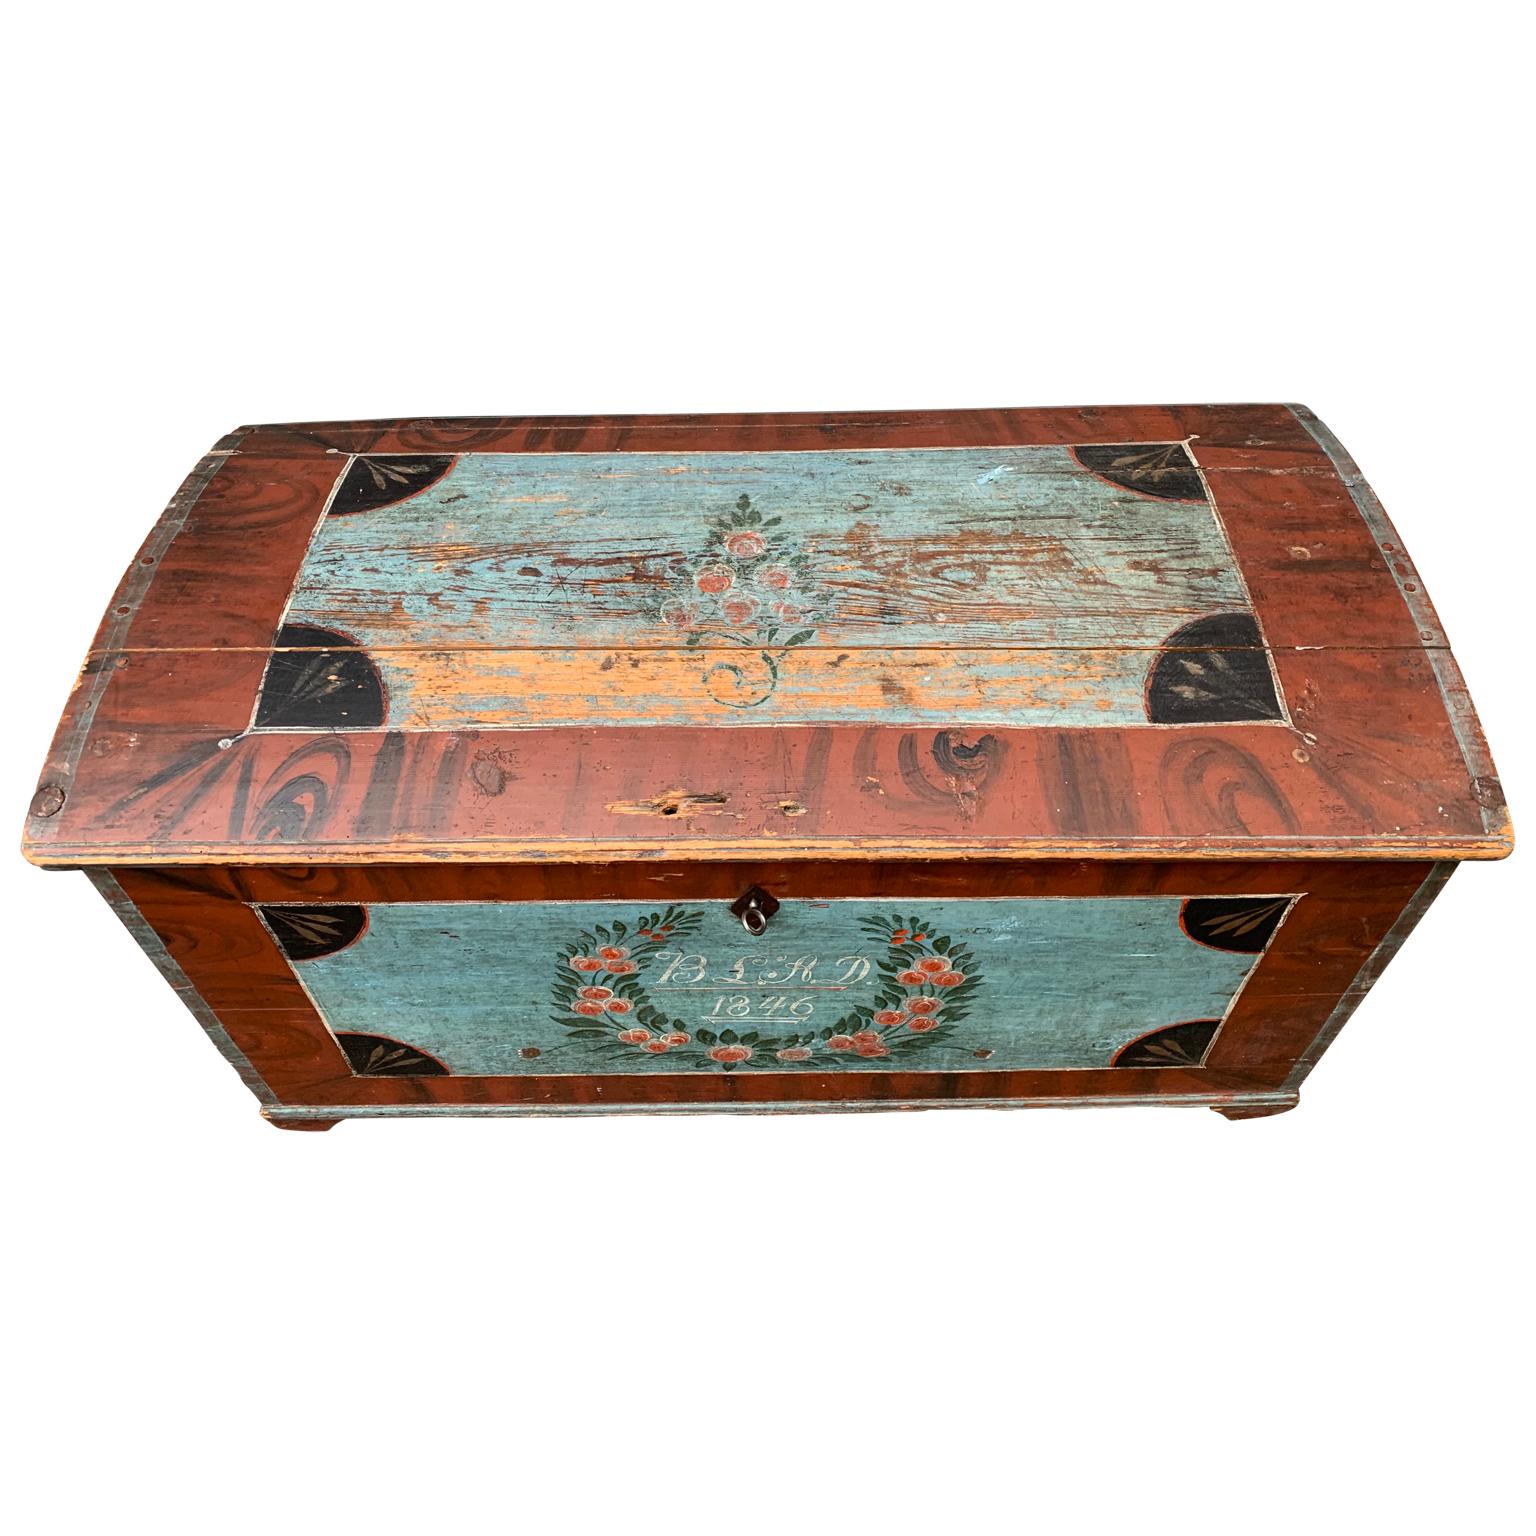 Country Swedish 19th Century Original Painted Dome-Top Wedding Trunk, Dated 1846